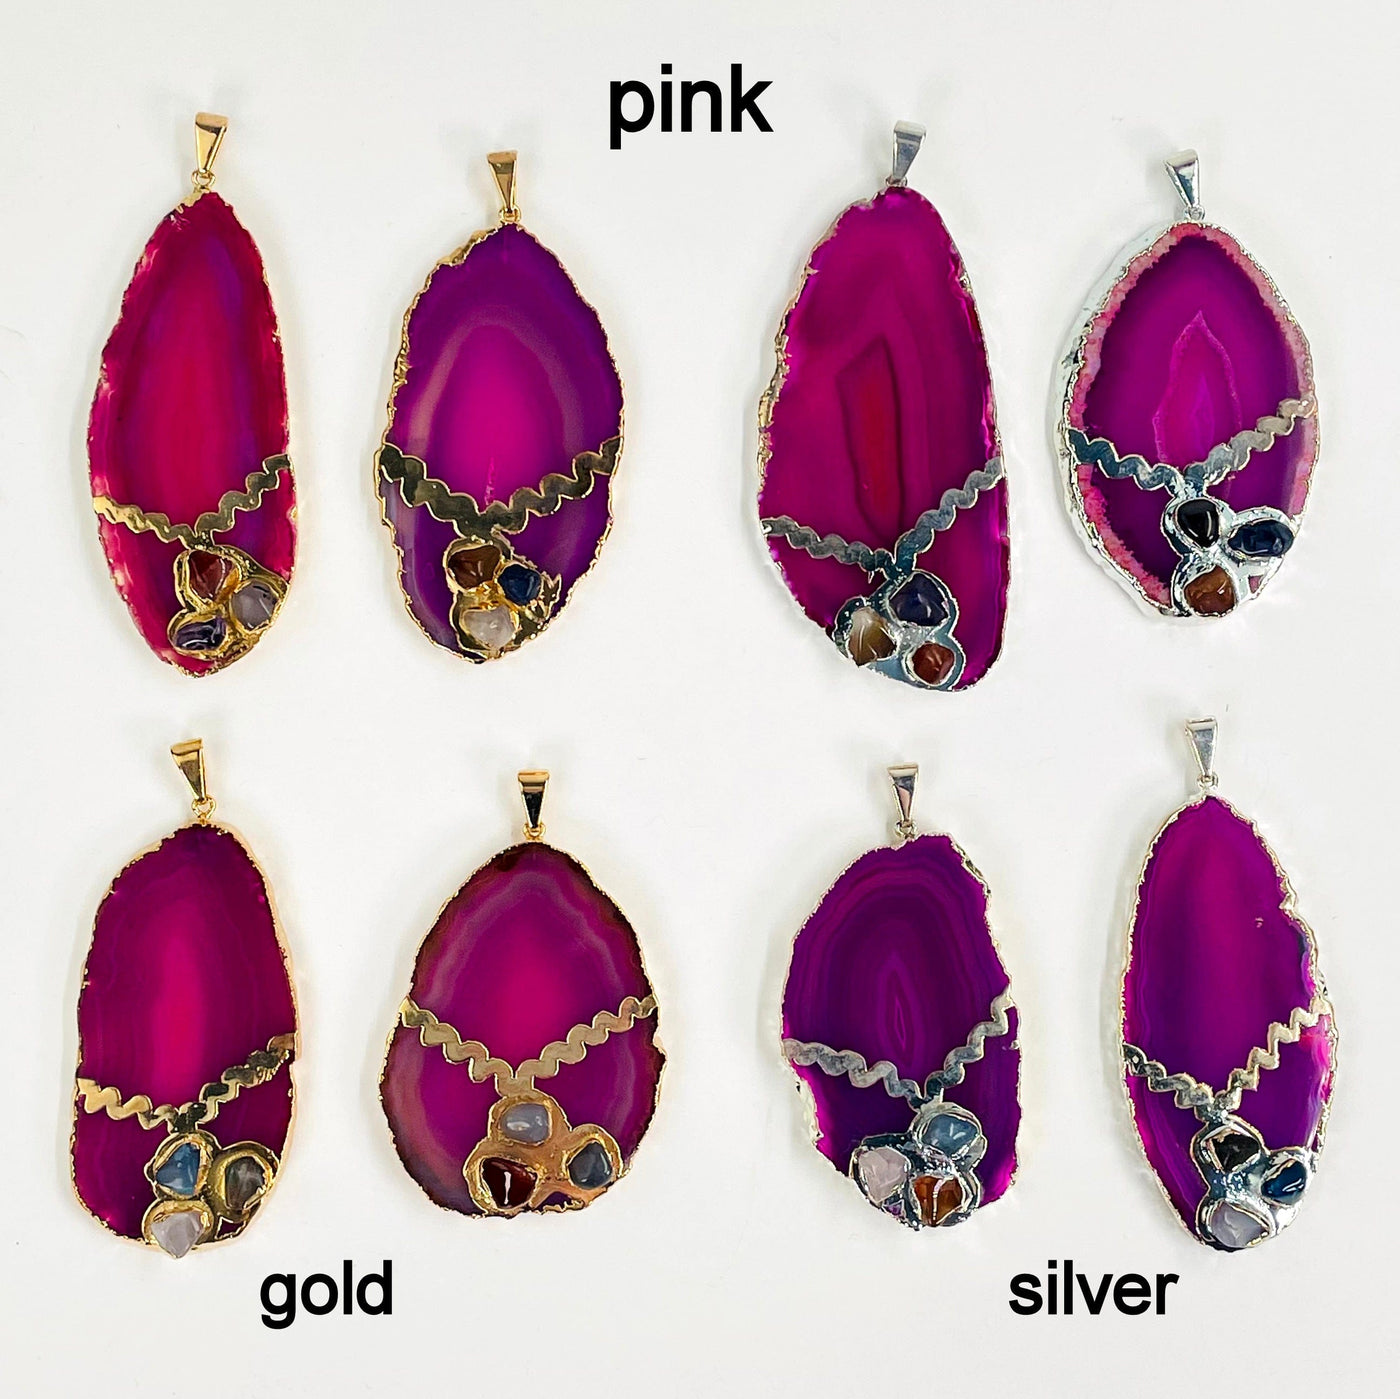 overhead view of four gold and four silver pink agate slice pendants on white background for possible variations and finish comparison